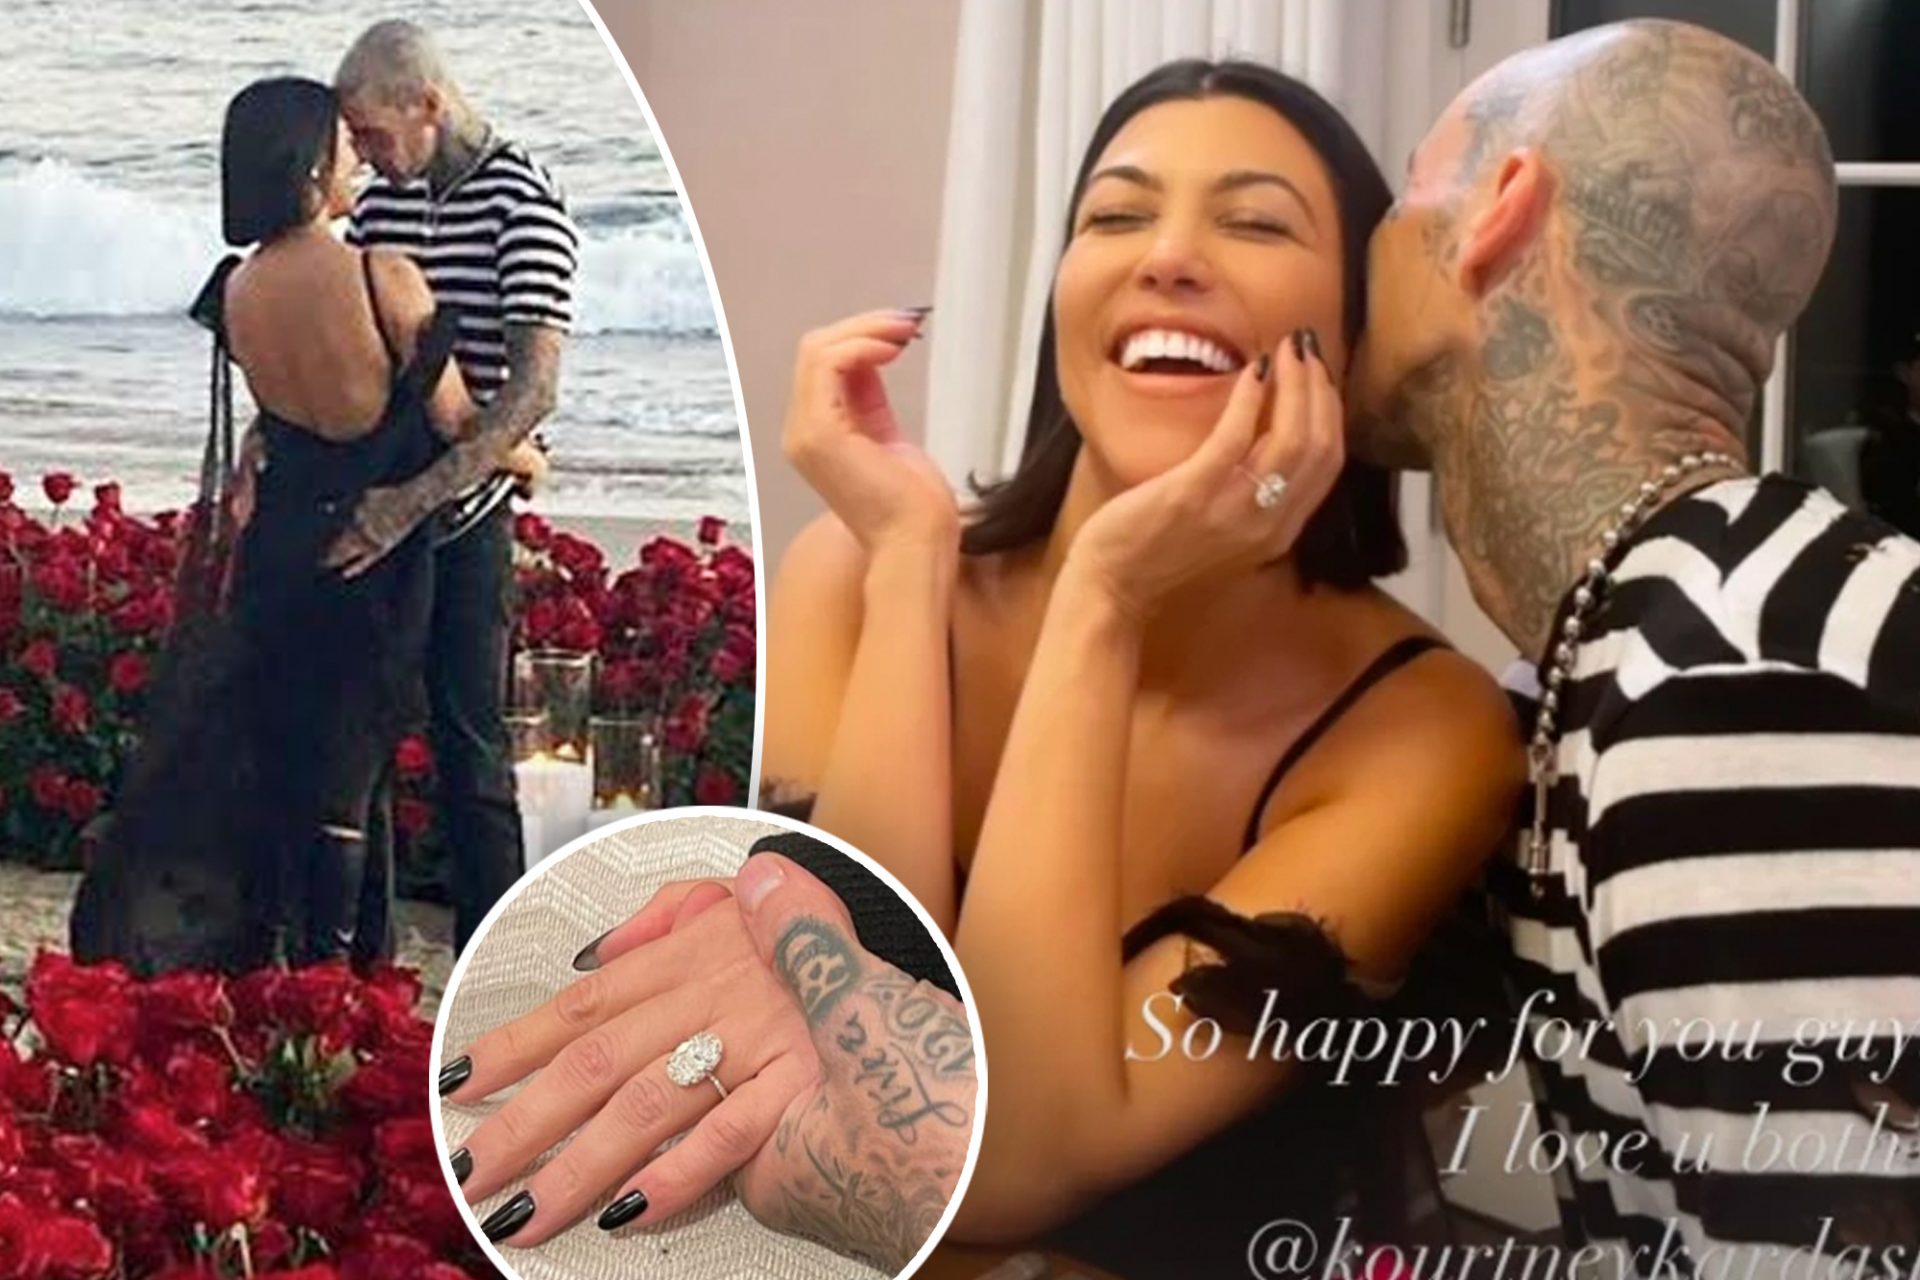 Kourtney Kardashian and Travis Barker are engaged: Peep pics from the proposal